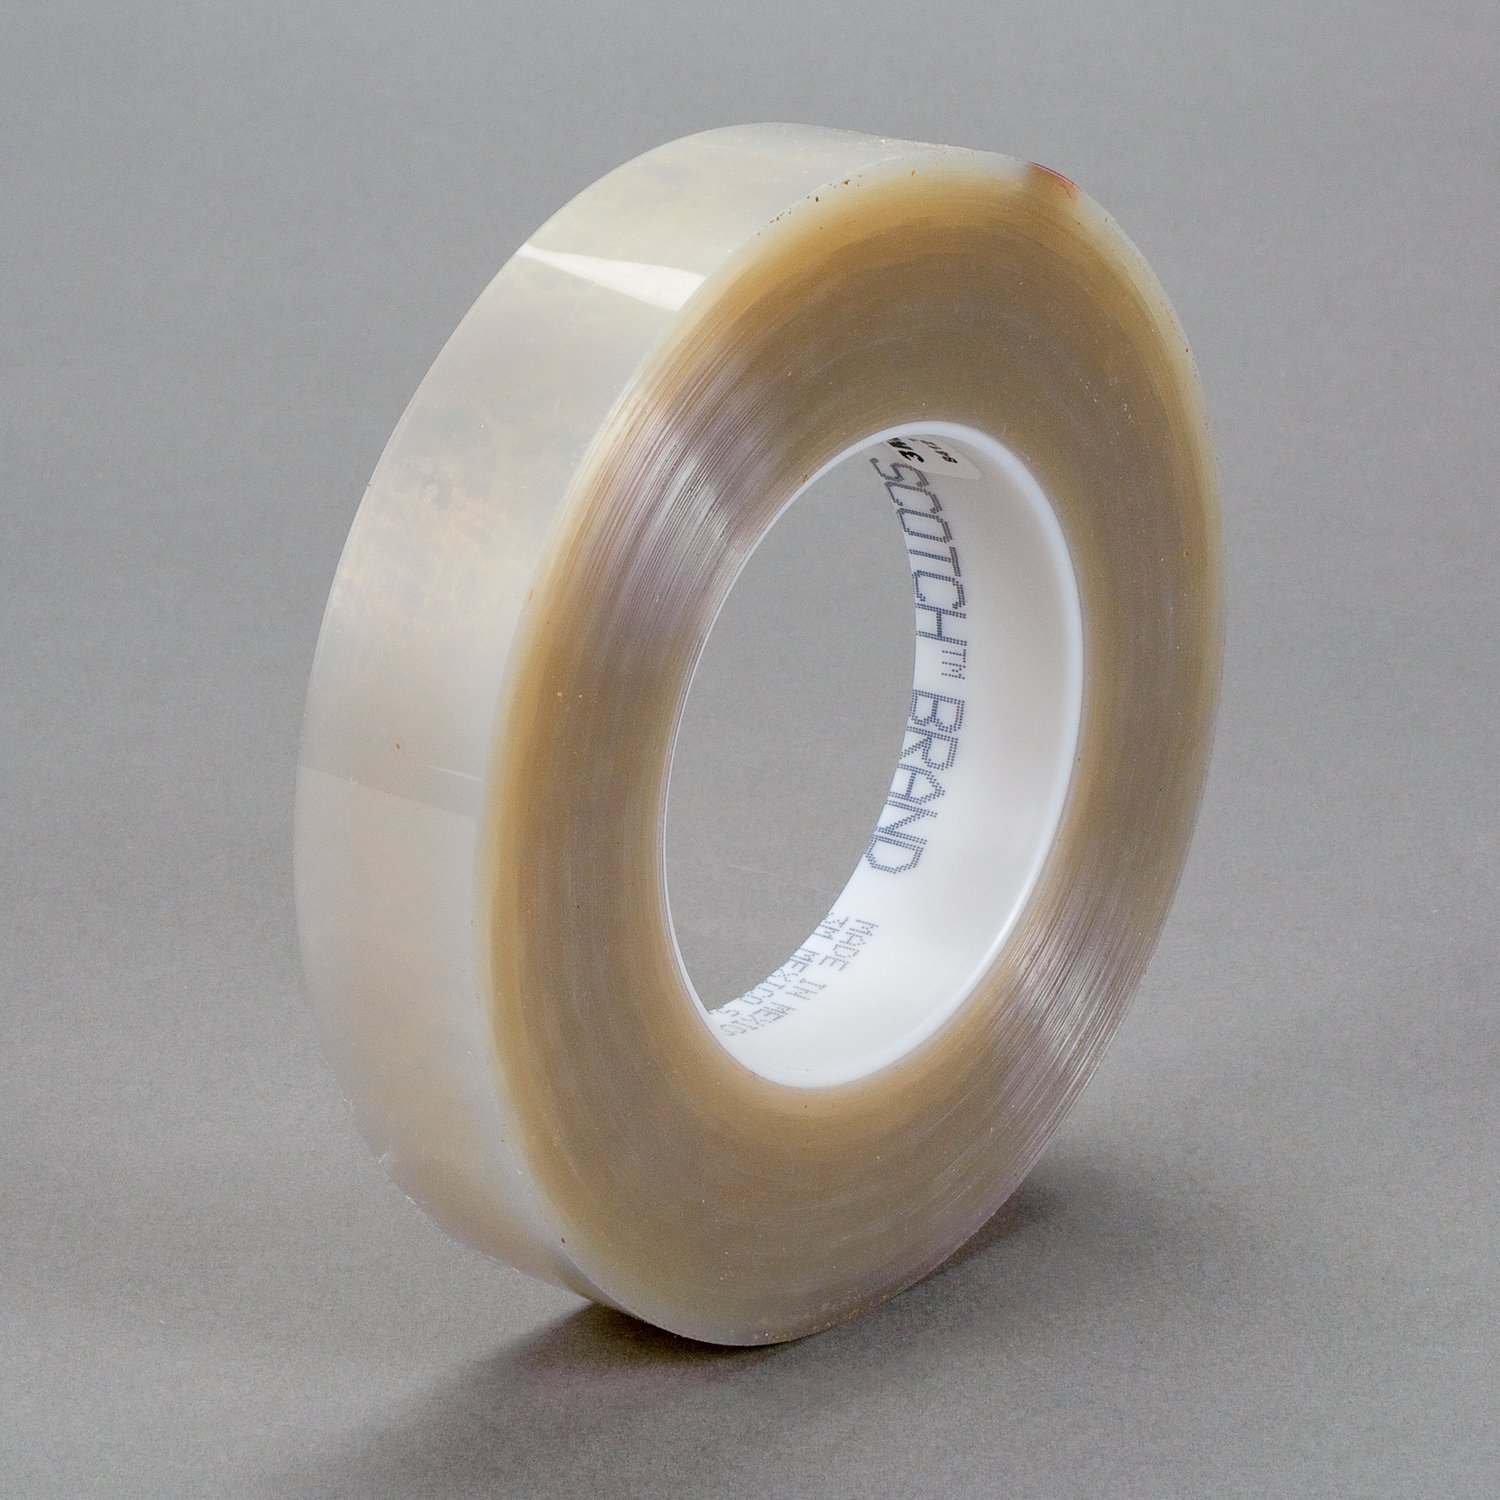 7000048491 - 3M Polyester Tape 8412, Transparent, 2 in x 72 yd, 6.3 mil, 24 rolls
per case